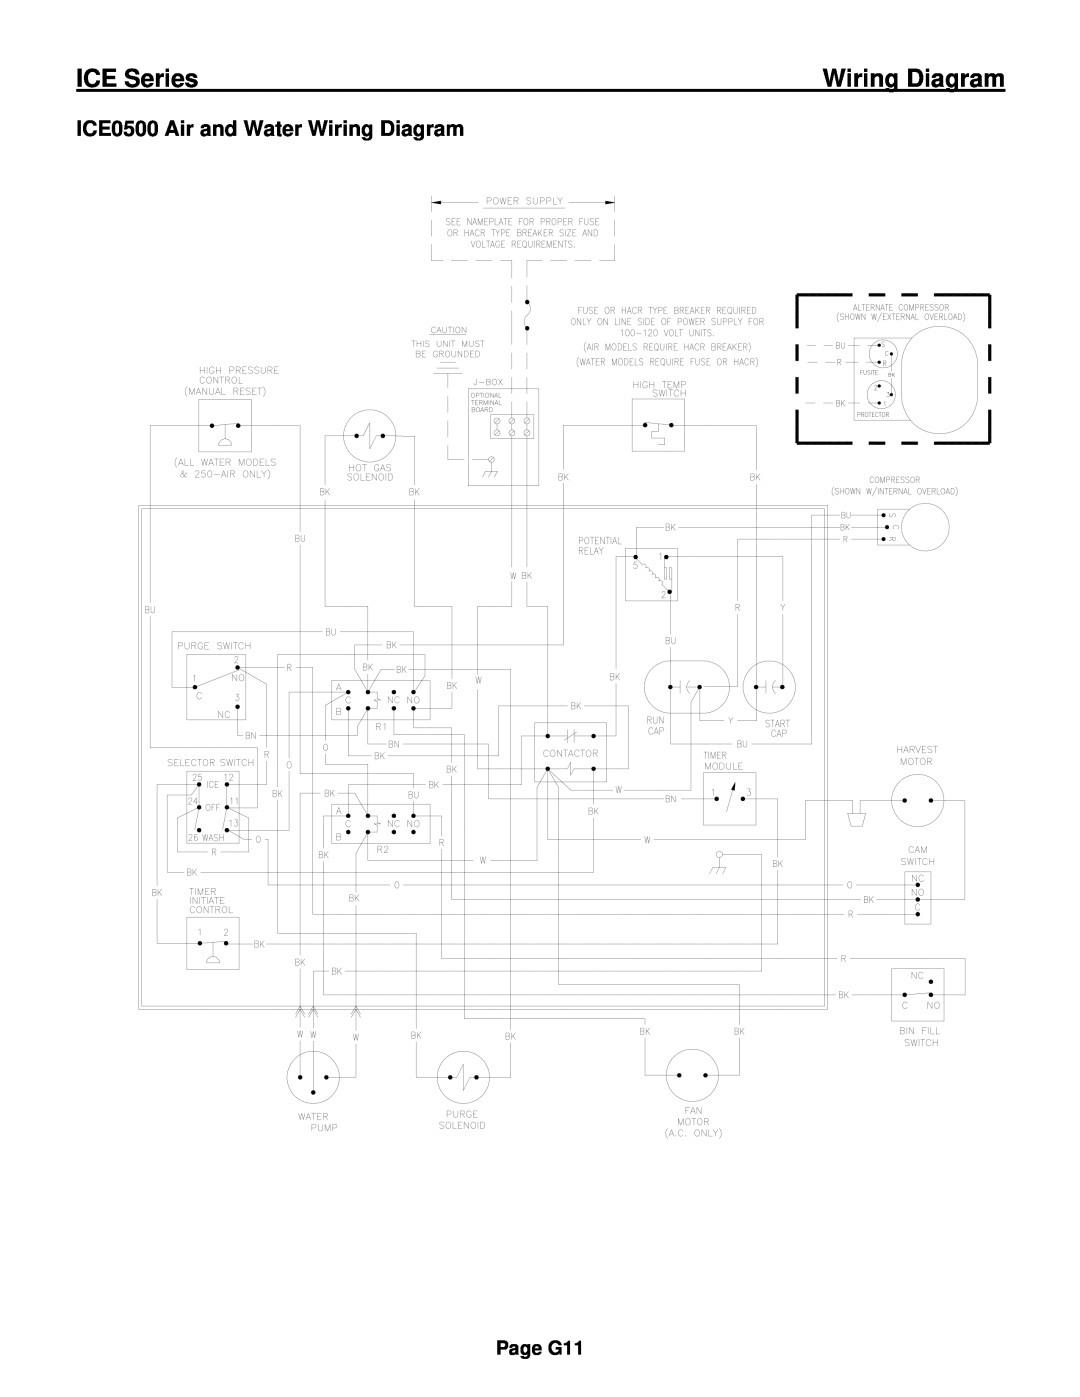 Ice-O-Matic ICE0250 Series installation manual ICE0500 Air and Water Wiring Diagram, ICE Series, Page G11 